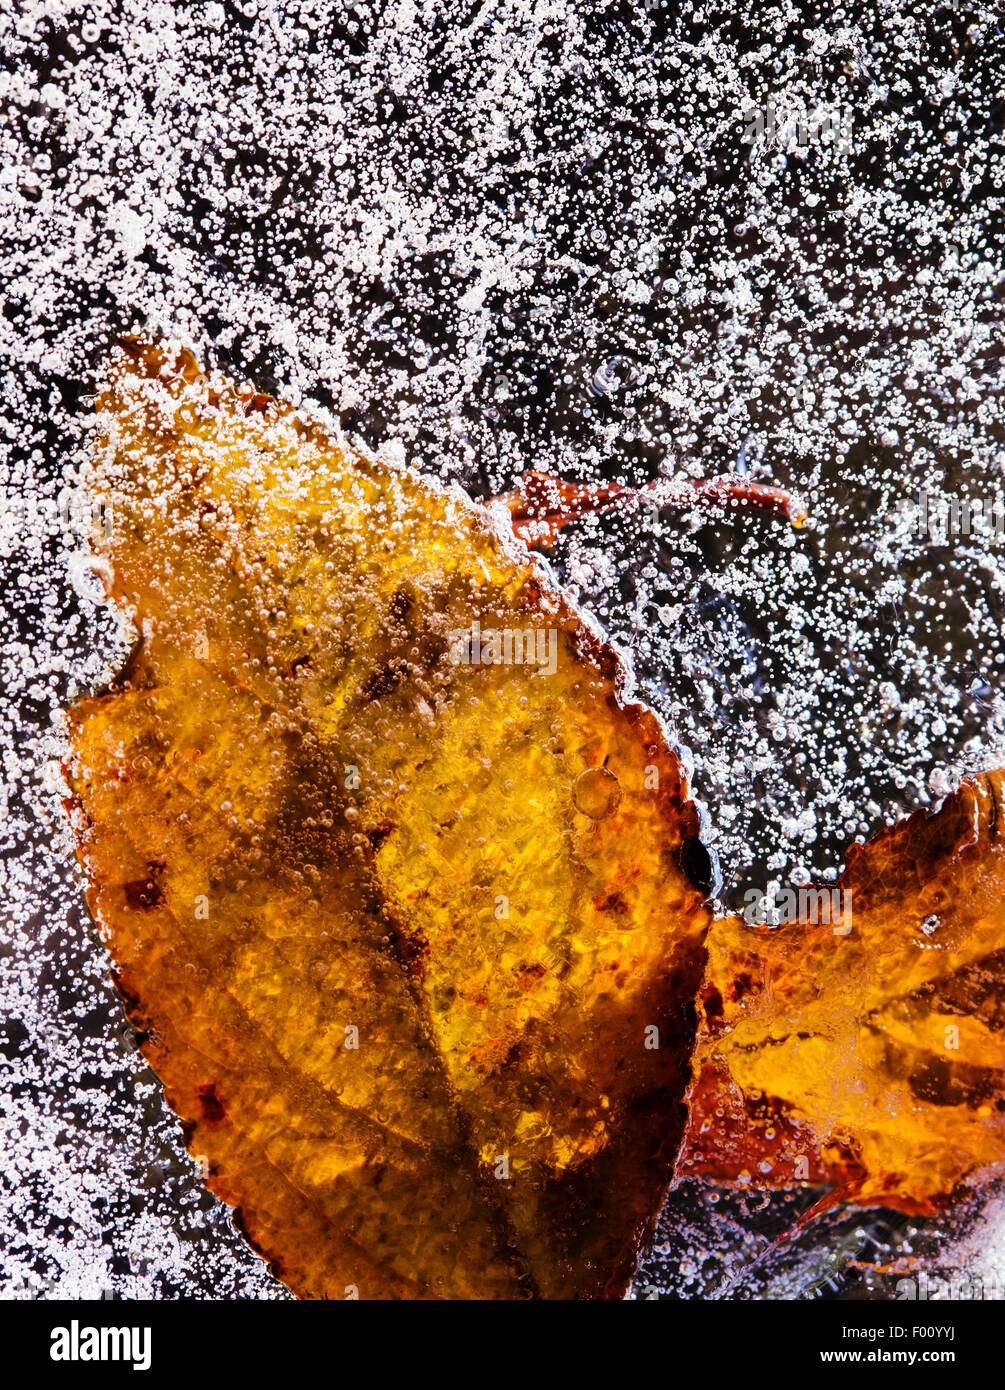 Leaf frozen in ice, close up photo Stock Photo